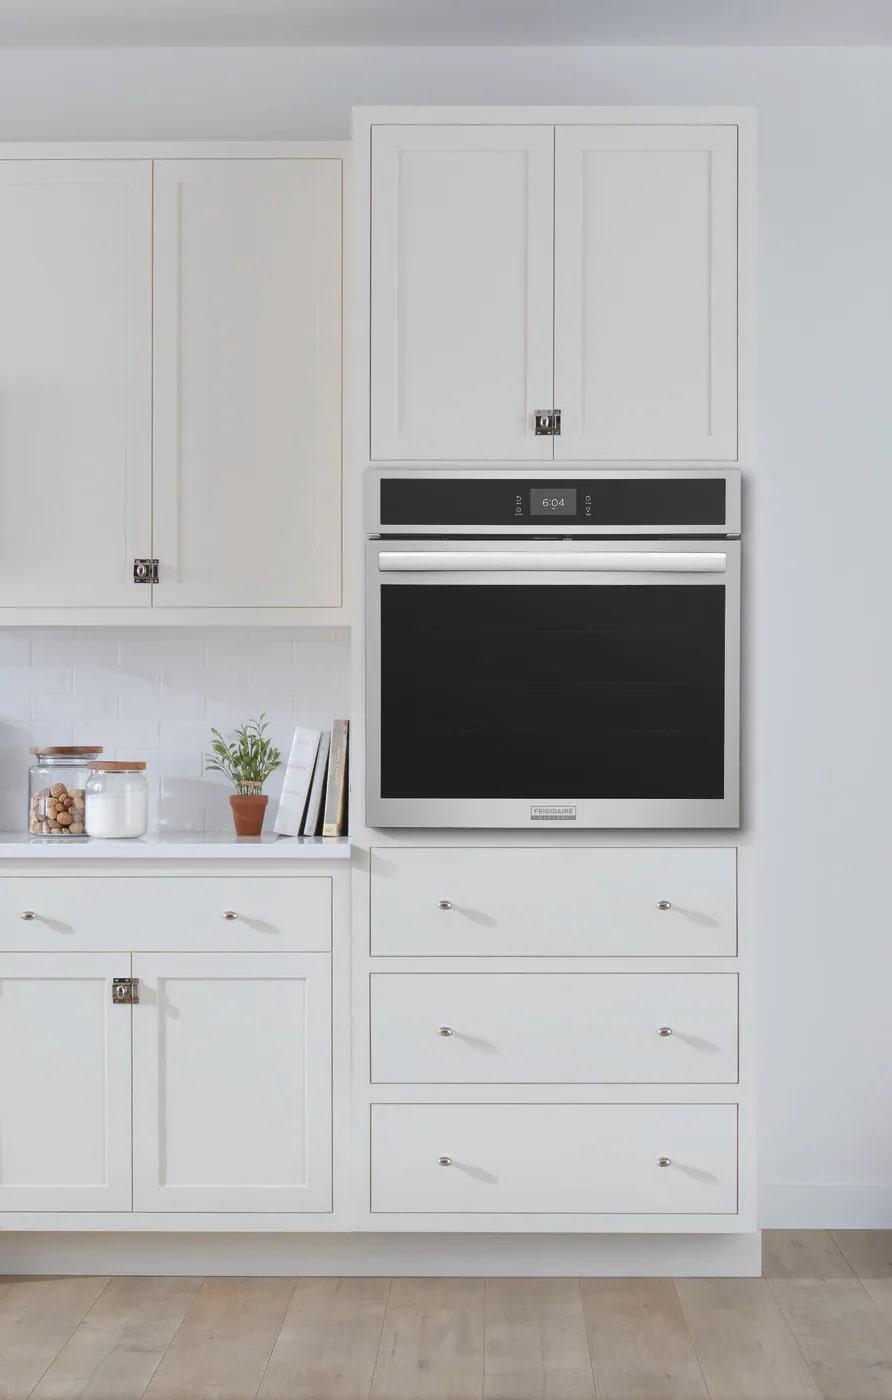 Frigidaire Gallery - 5.3 cu. ft Single Wall Oven in Stainless - GCWS3067AF